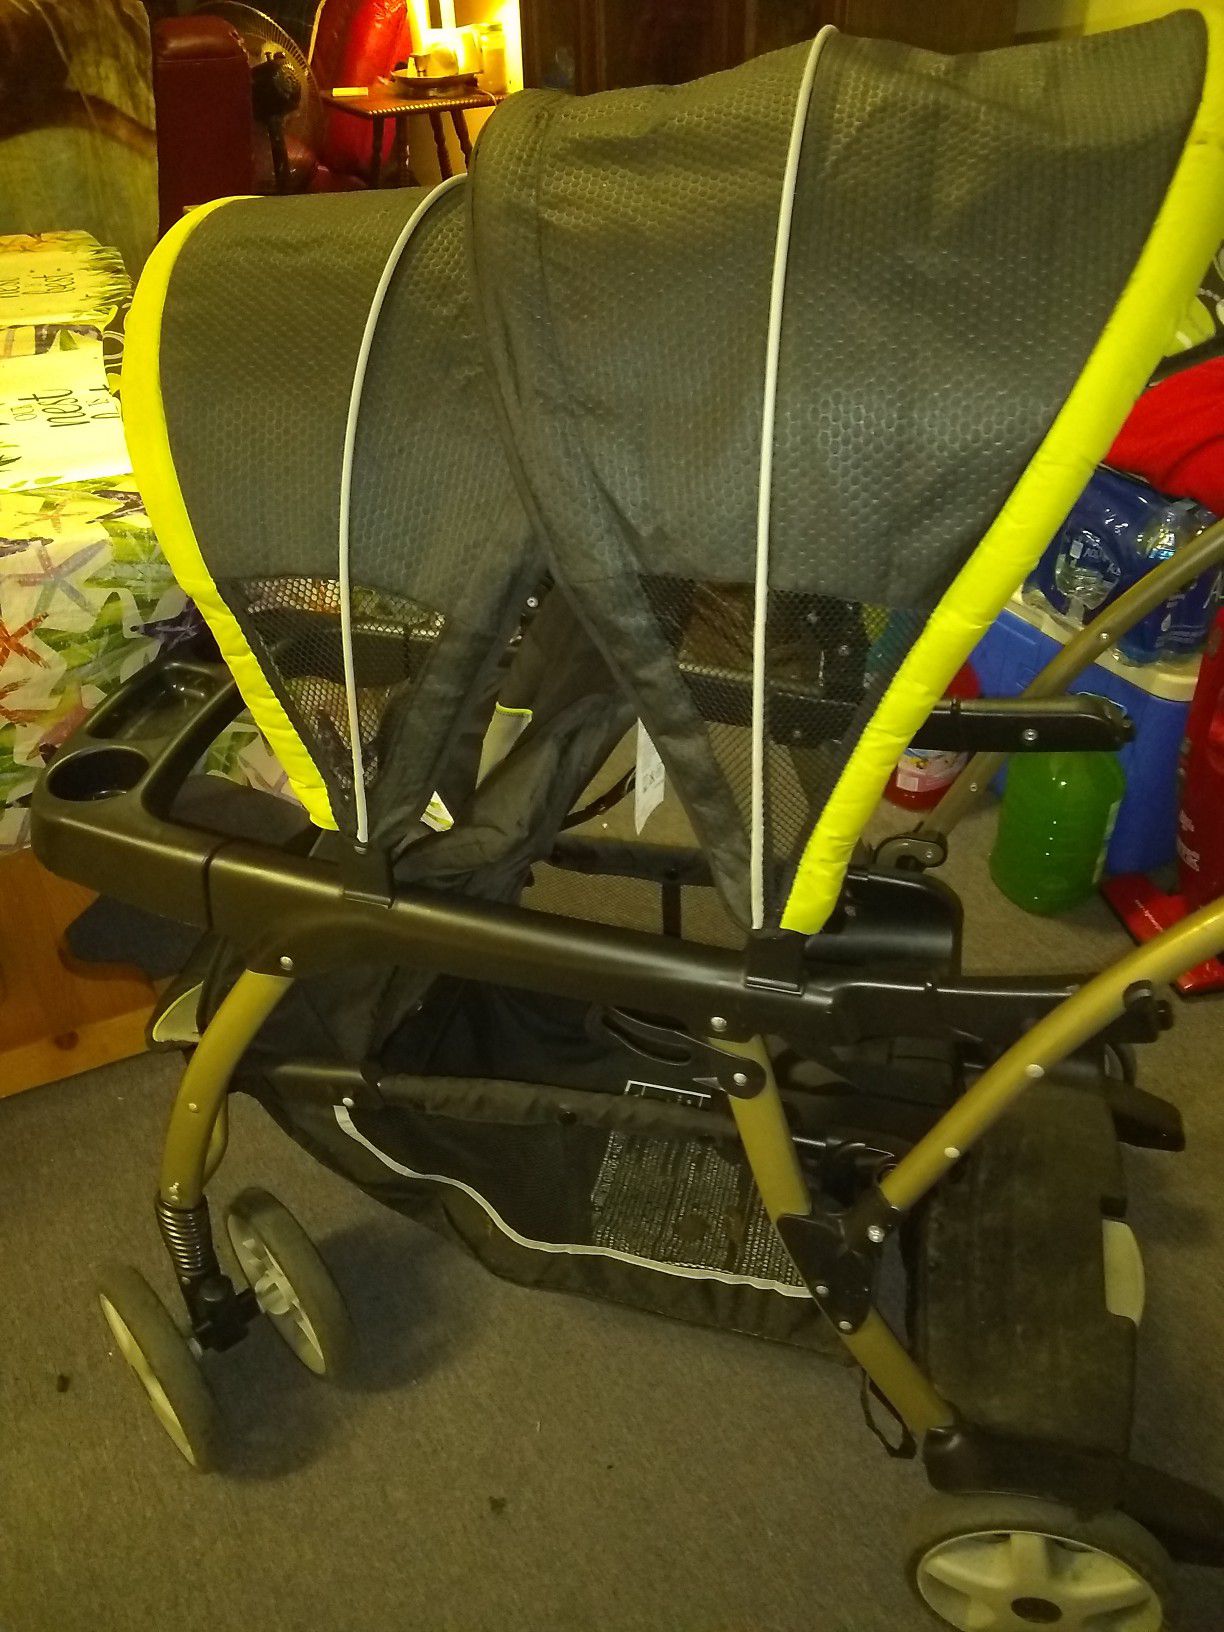 A Double stroller for two children app for sale for $35